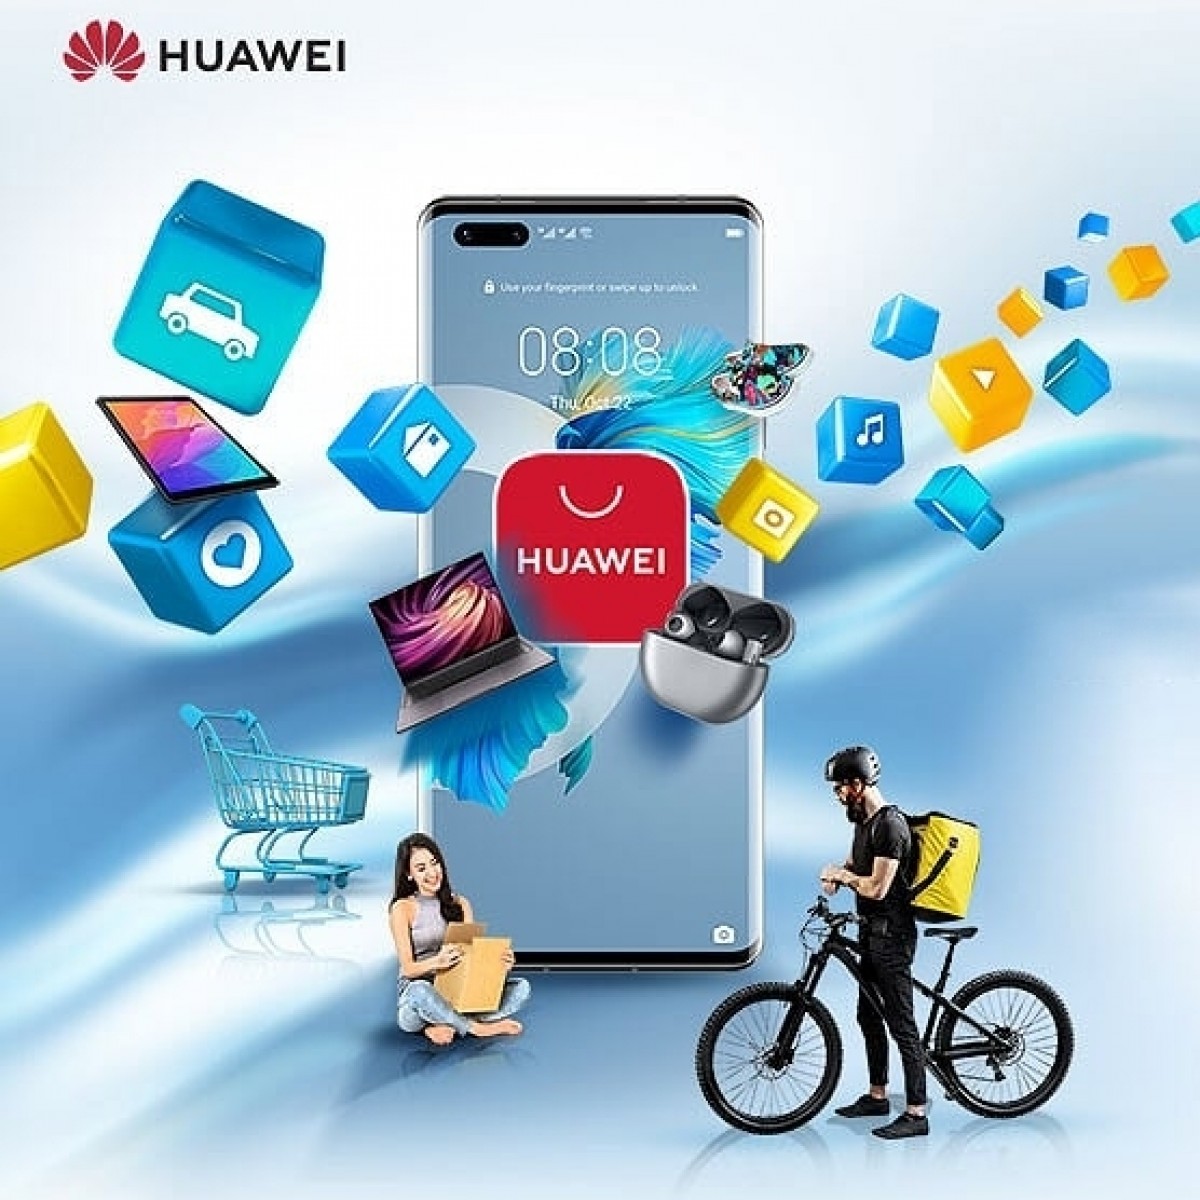 Huawei jumps in to help e-businesses and app developers with offers on AppGallery